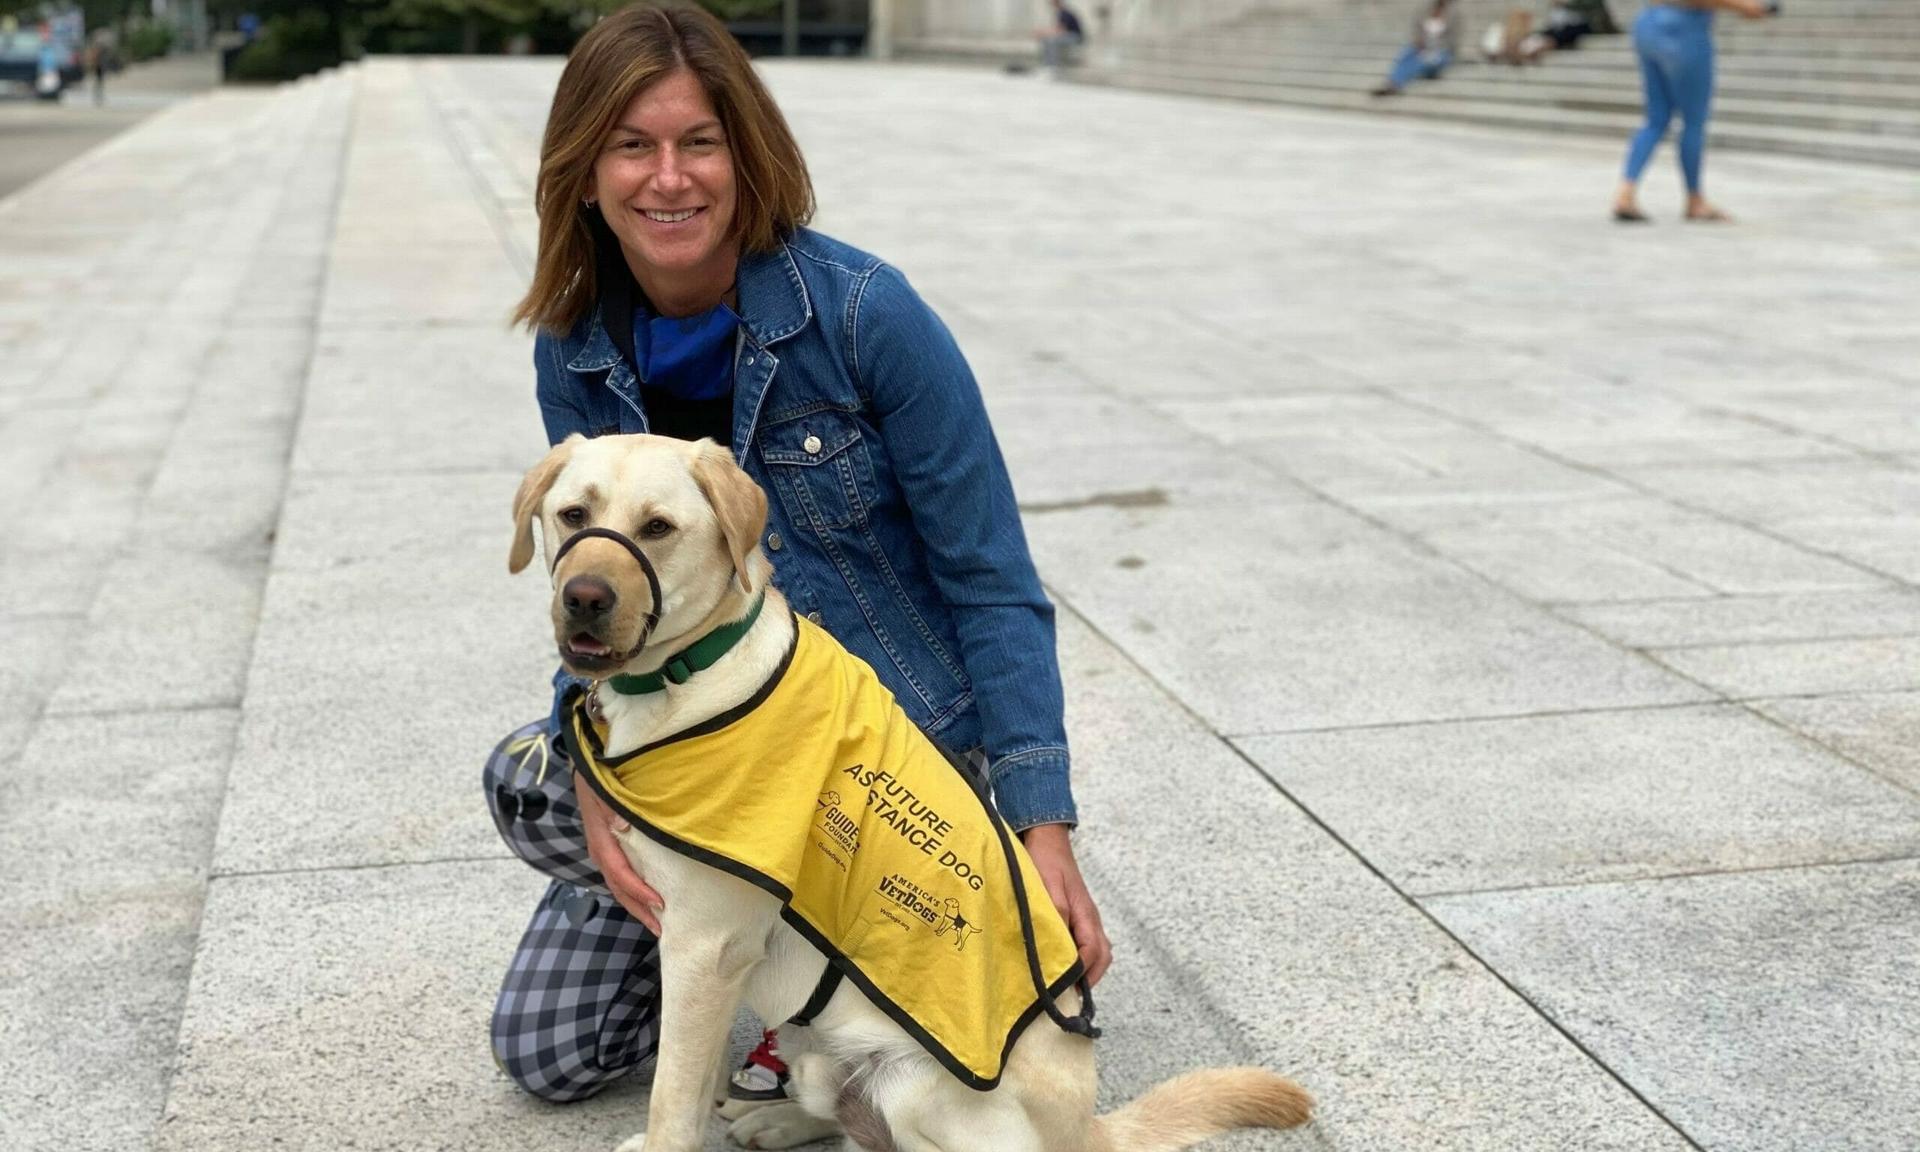 In addition to her role at Deloitte, Deborah Golden trains guard dogs for the Guide Dog Foundation.